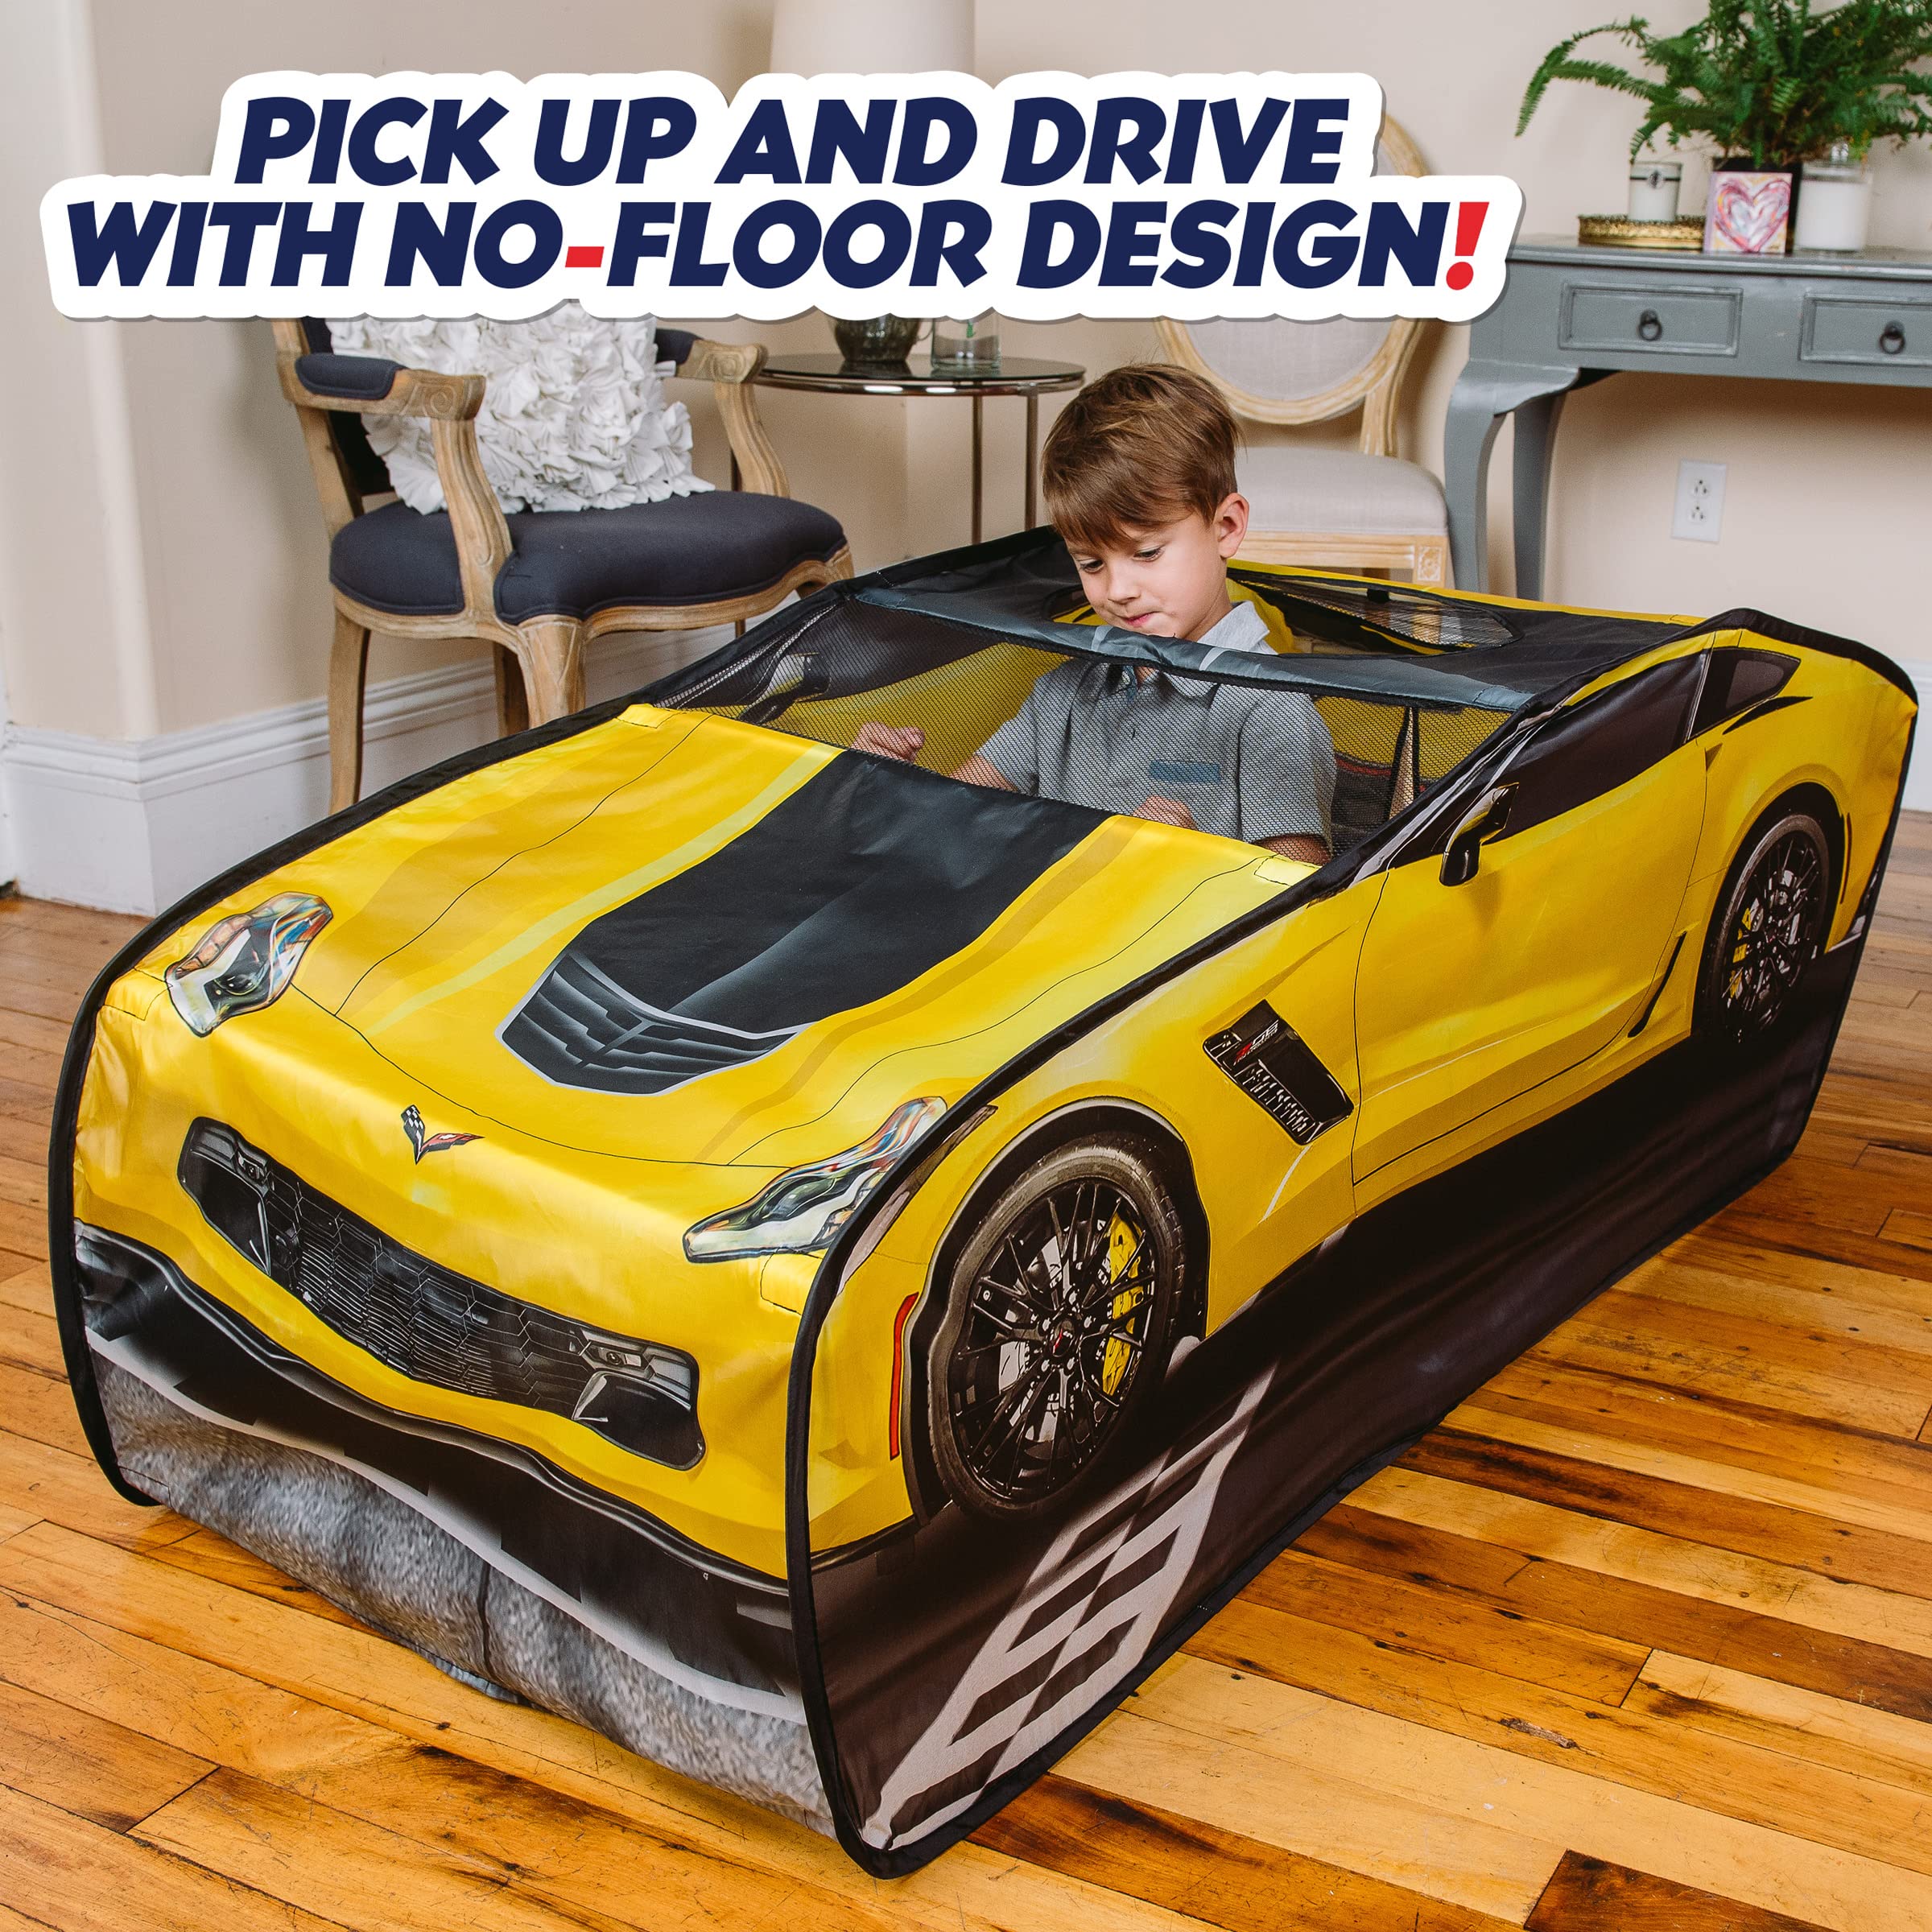 Sunny Days Entertainment Chevy Corvette Pop Up Tent | Large Sports Car Play Tent for Kids, Yellow